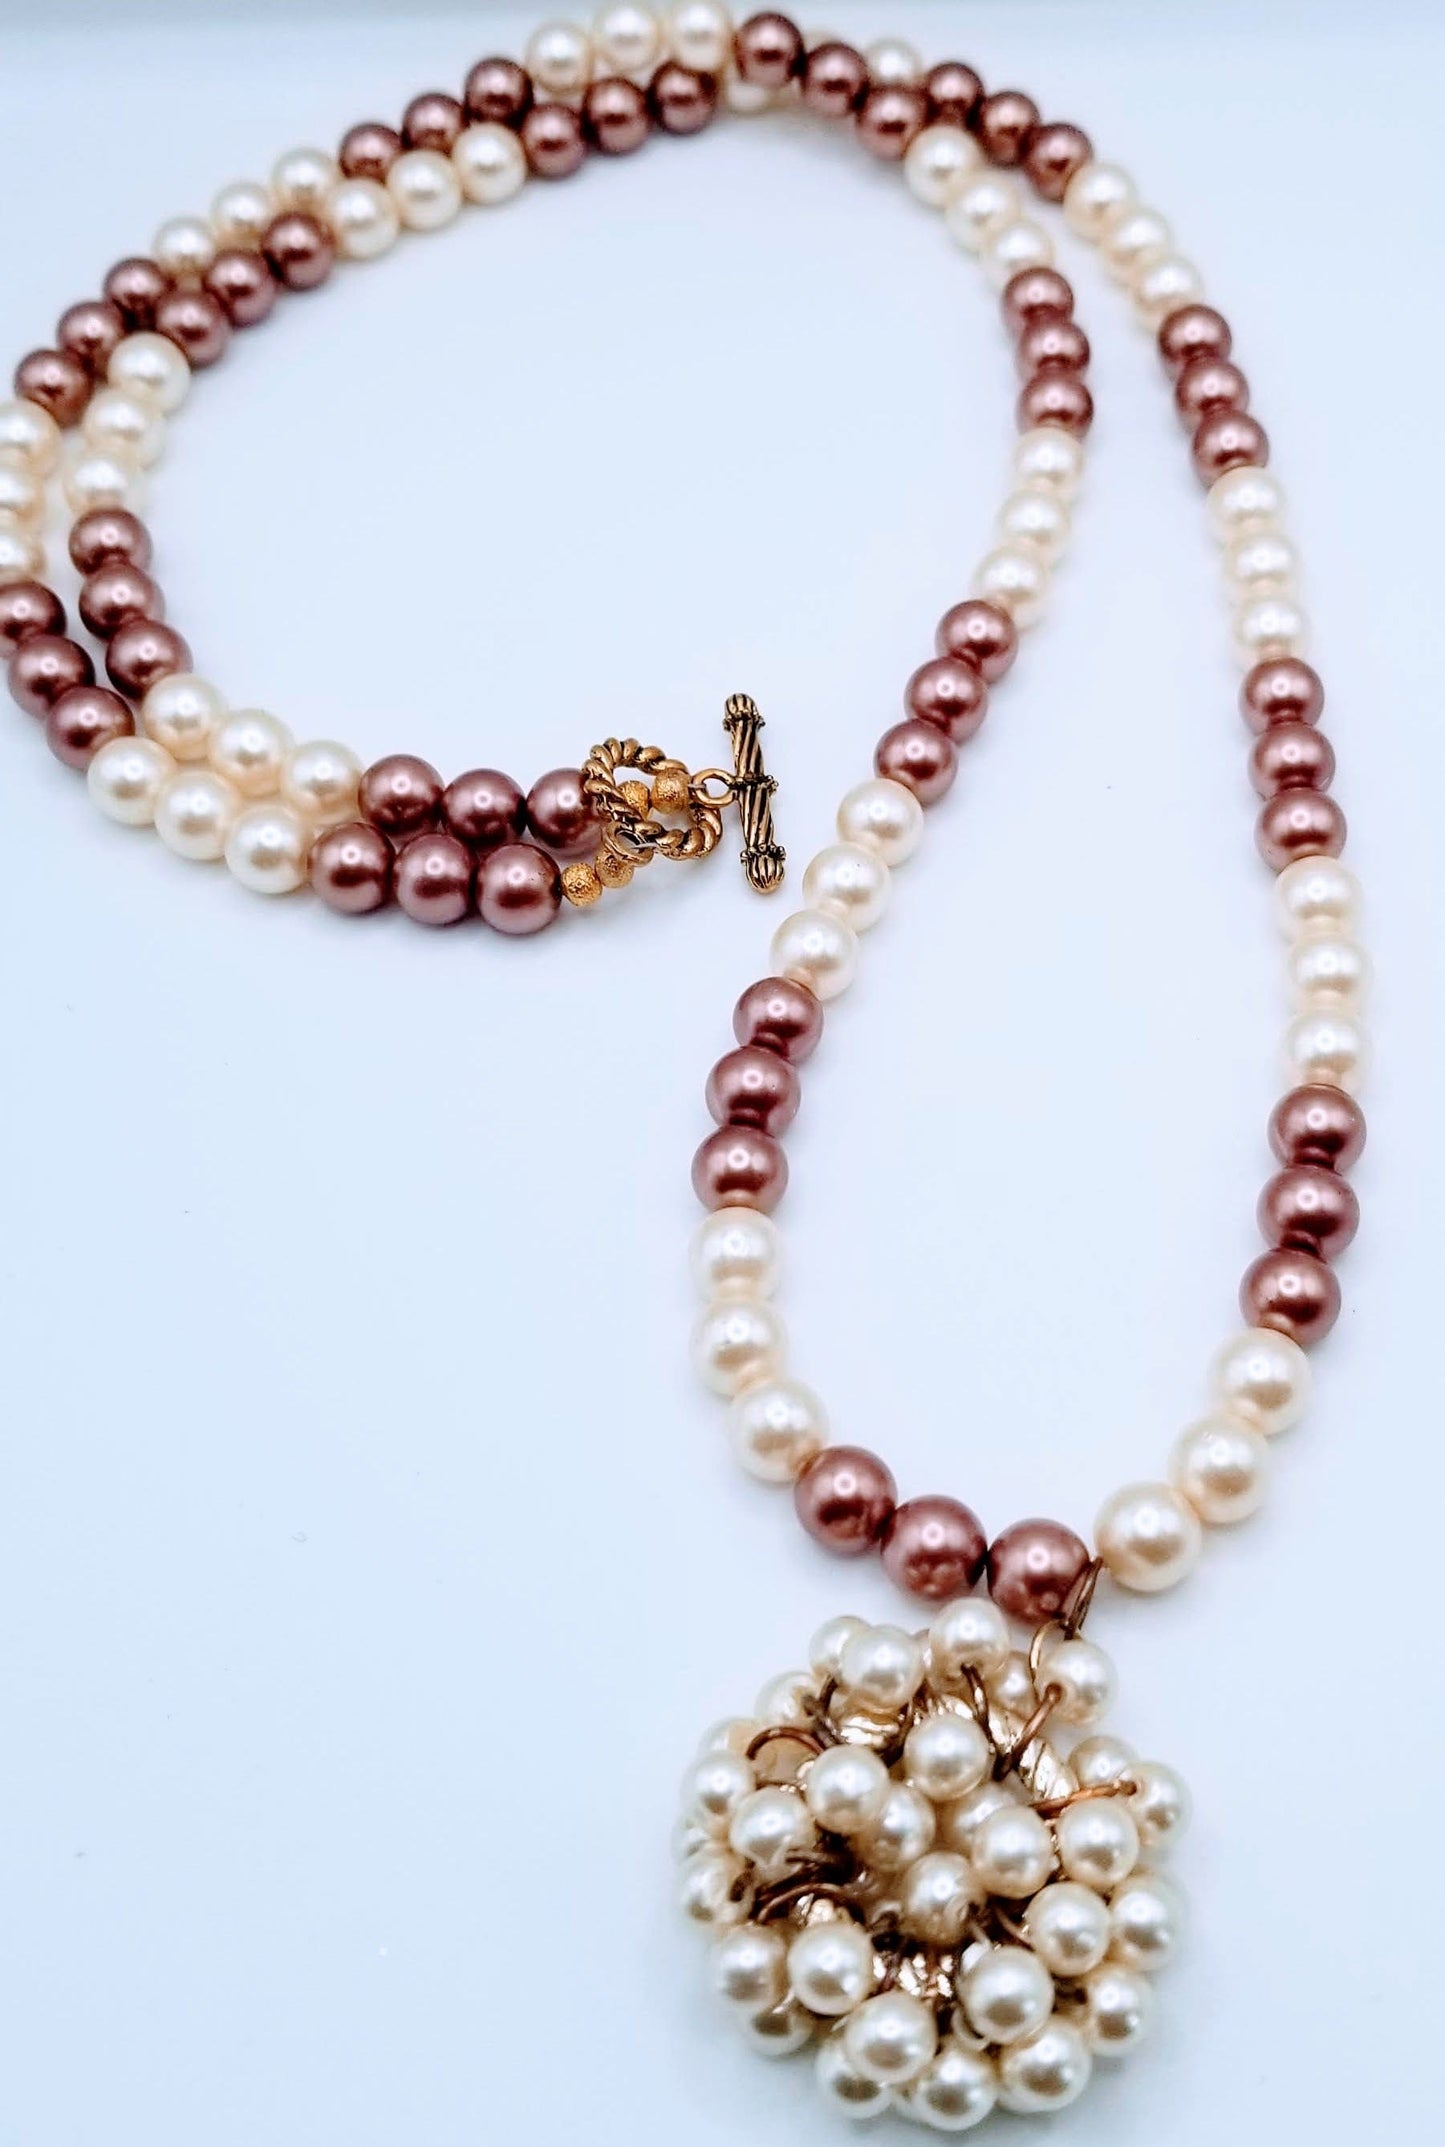 Handcrafted Jewelry By Teri C Necklace Falling In Love With Pearls